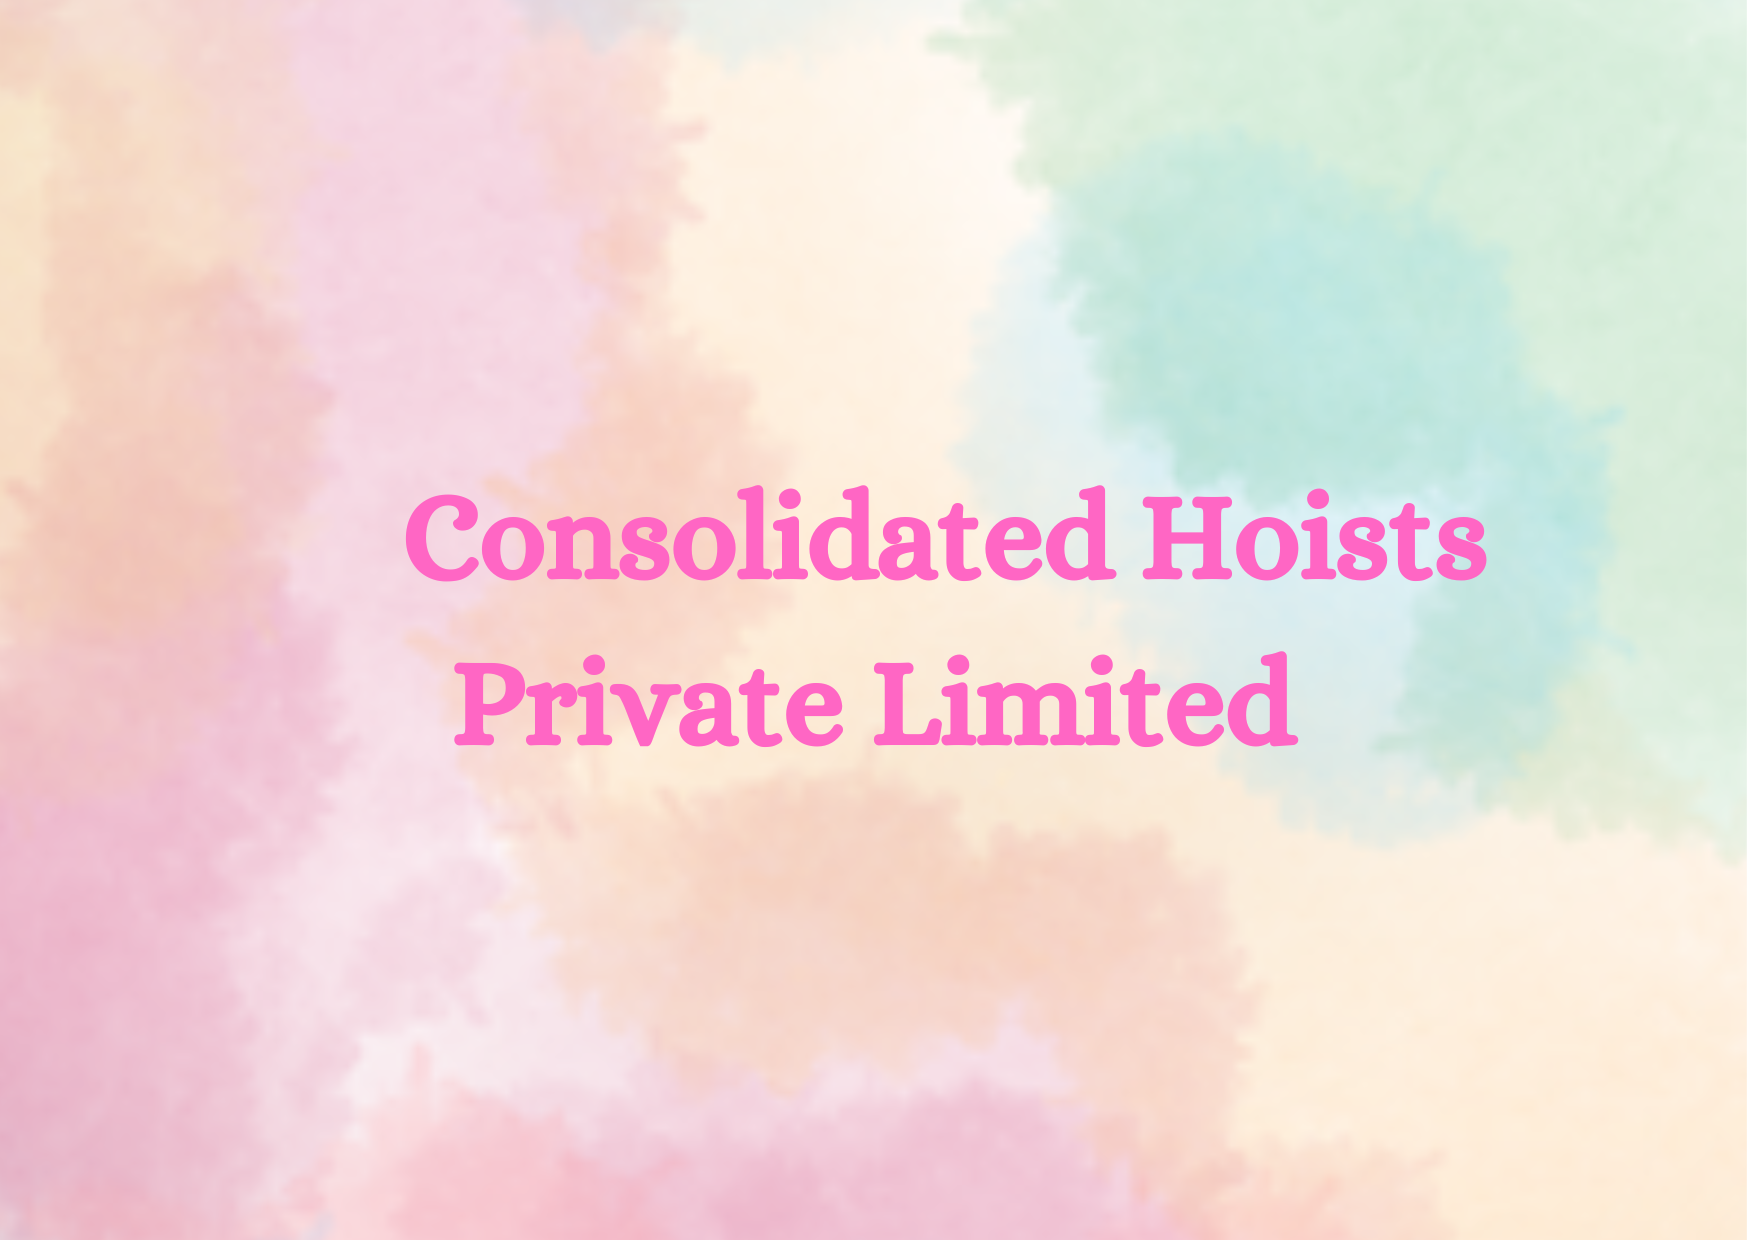  Consolidated Hoists Private Limited 